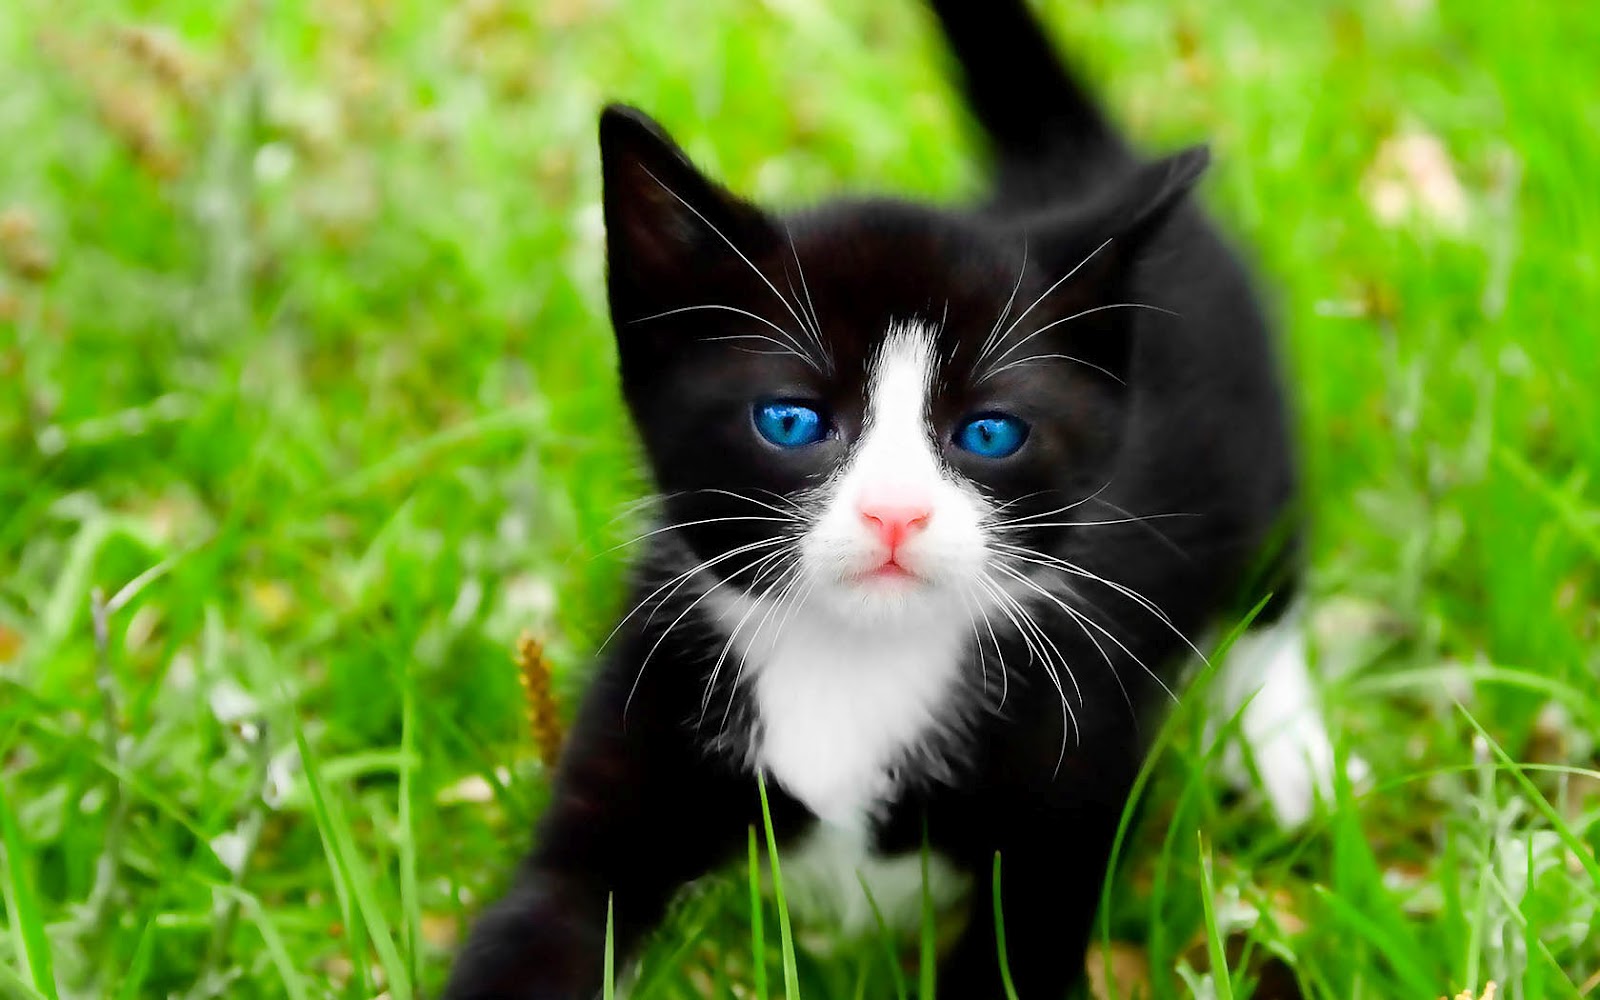 hd cat wallpaper with a black cat on the grass hd cats wallpapers